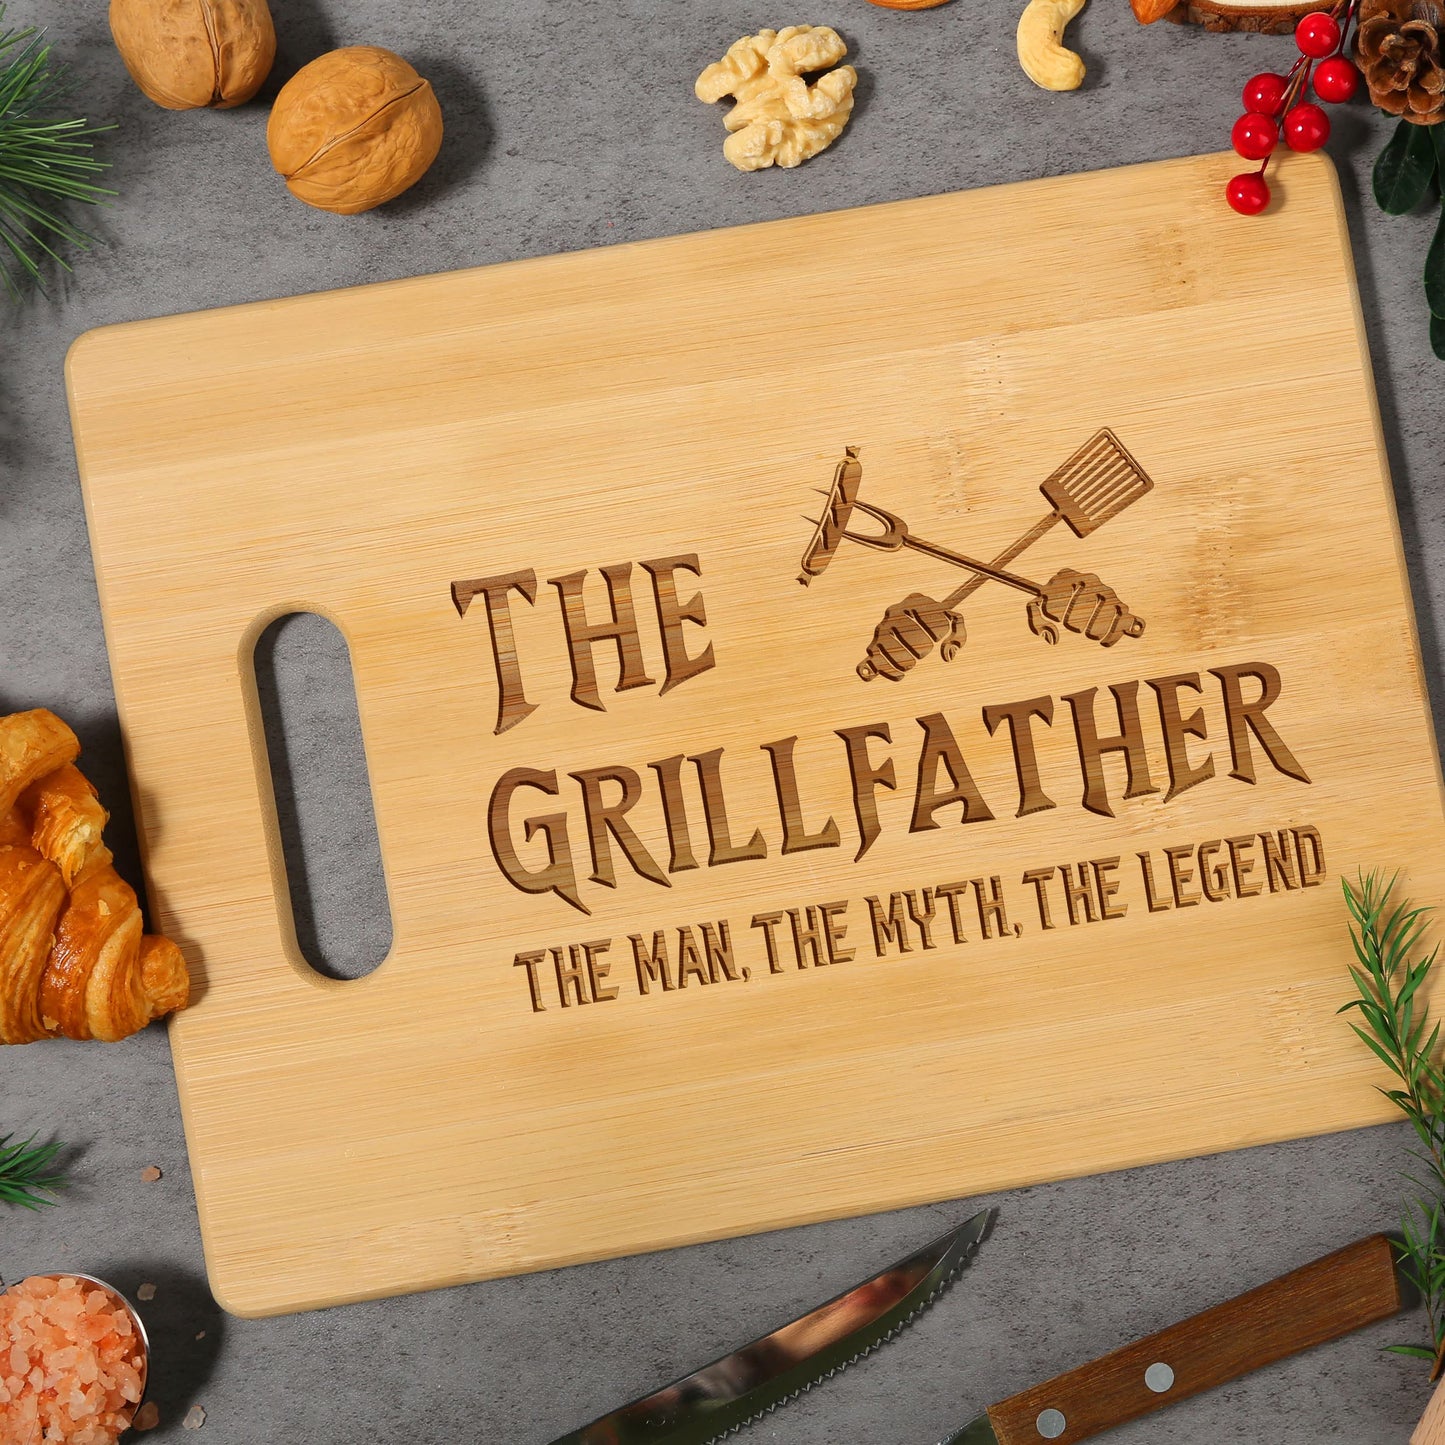 Pandasch Fathers Day or Birthday Gifts for Dad, Best Dad Gift from Daughter Son - Unique Engraved Bamboo Cutting Board Gift for Dad Fatner Papa - The Grillfather, The Man, The Myth, The Legend